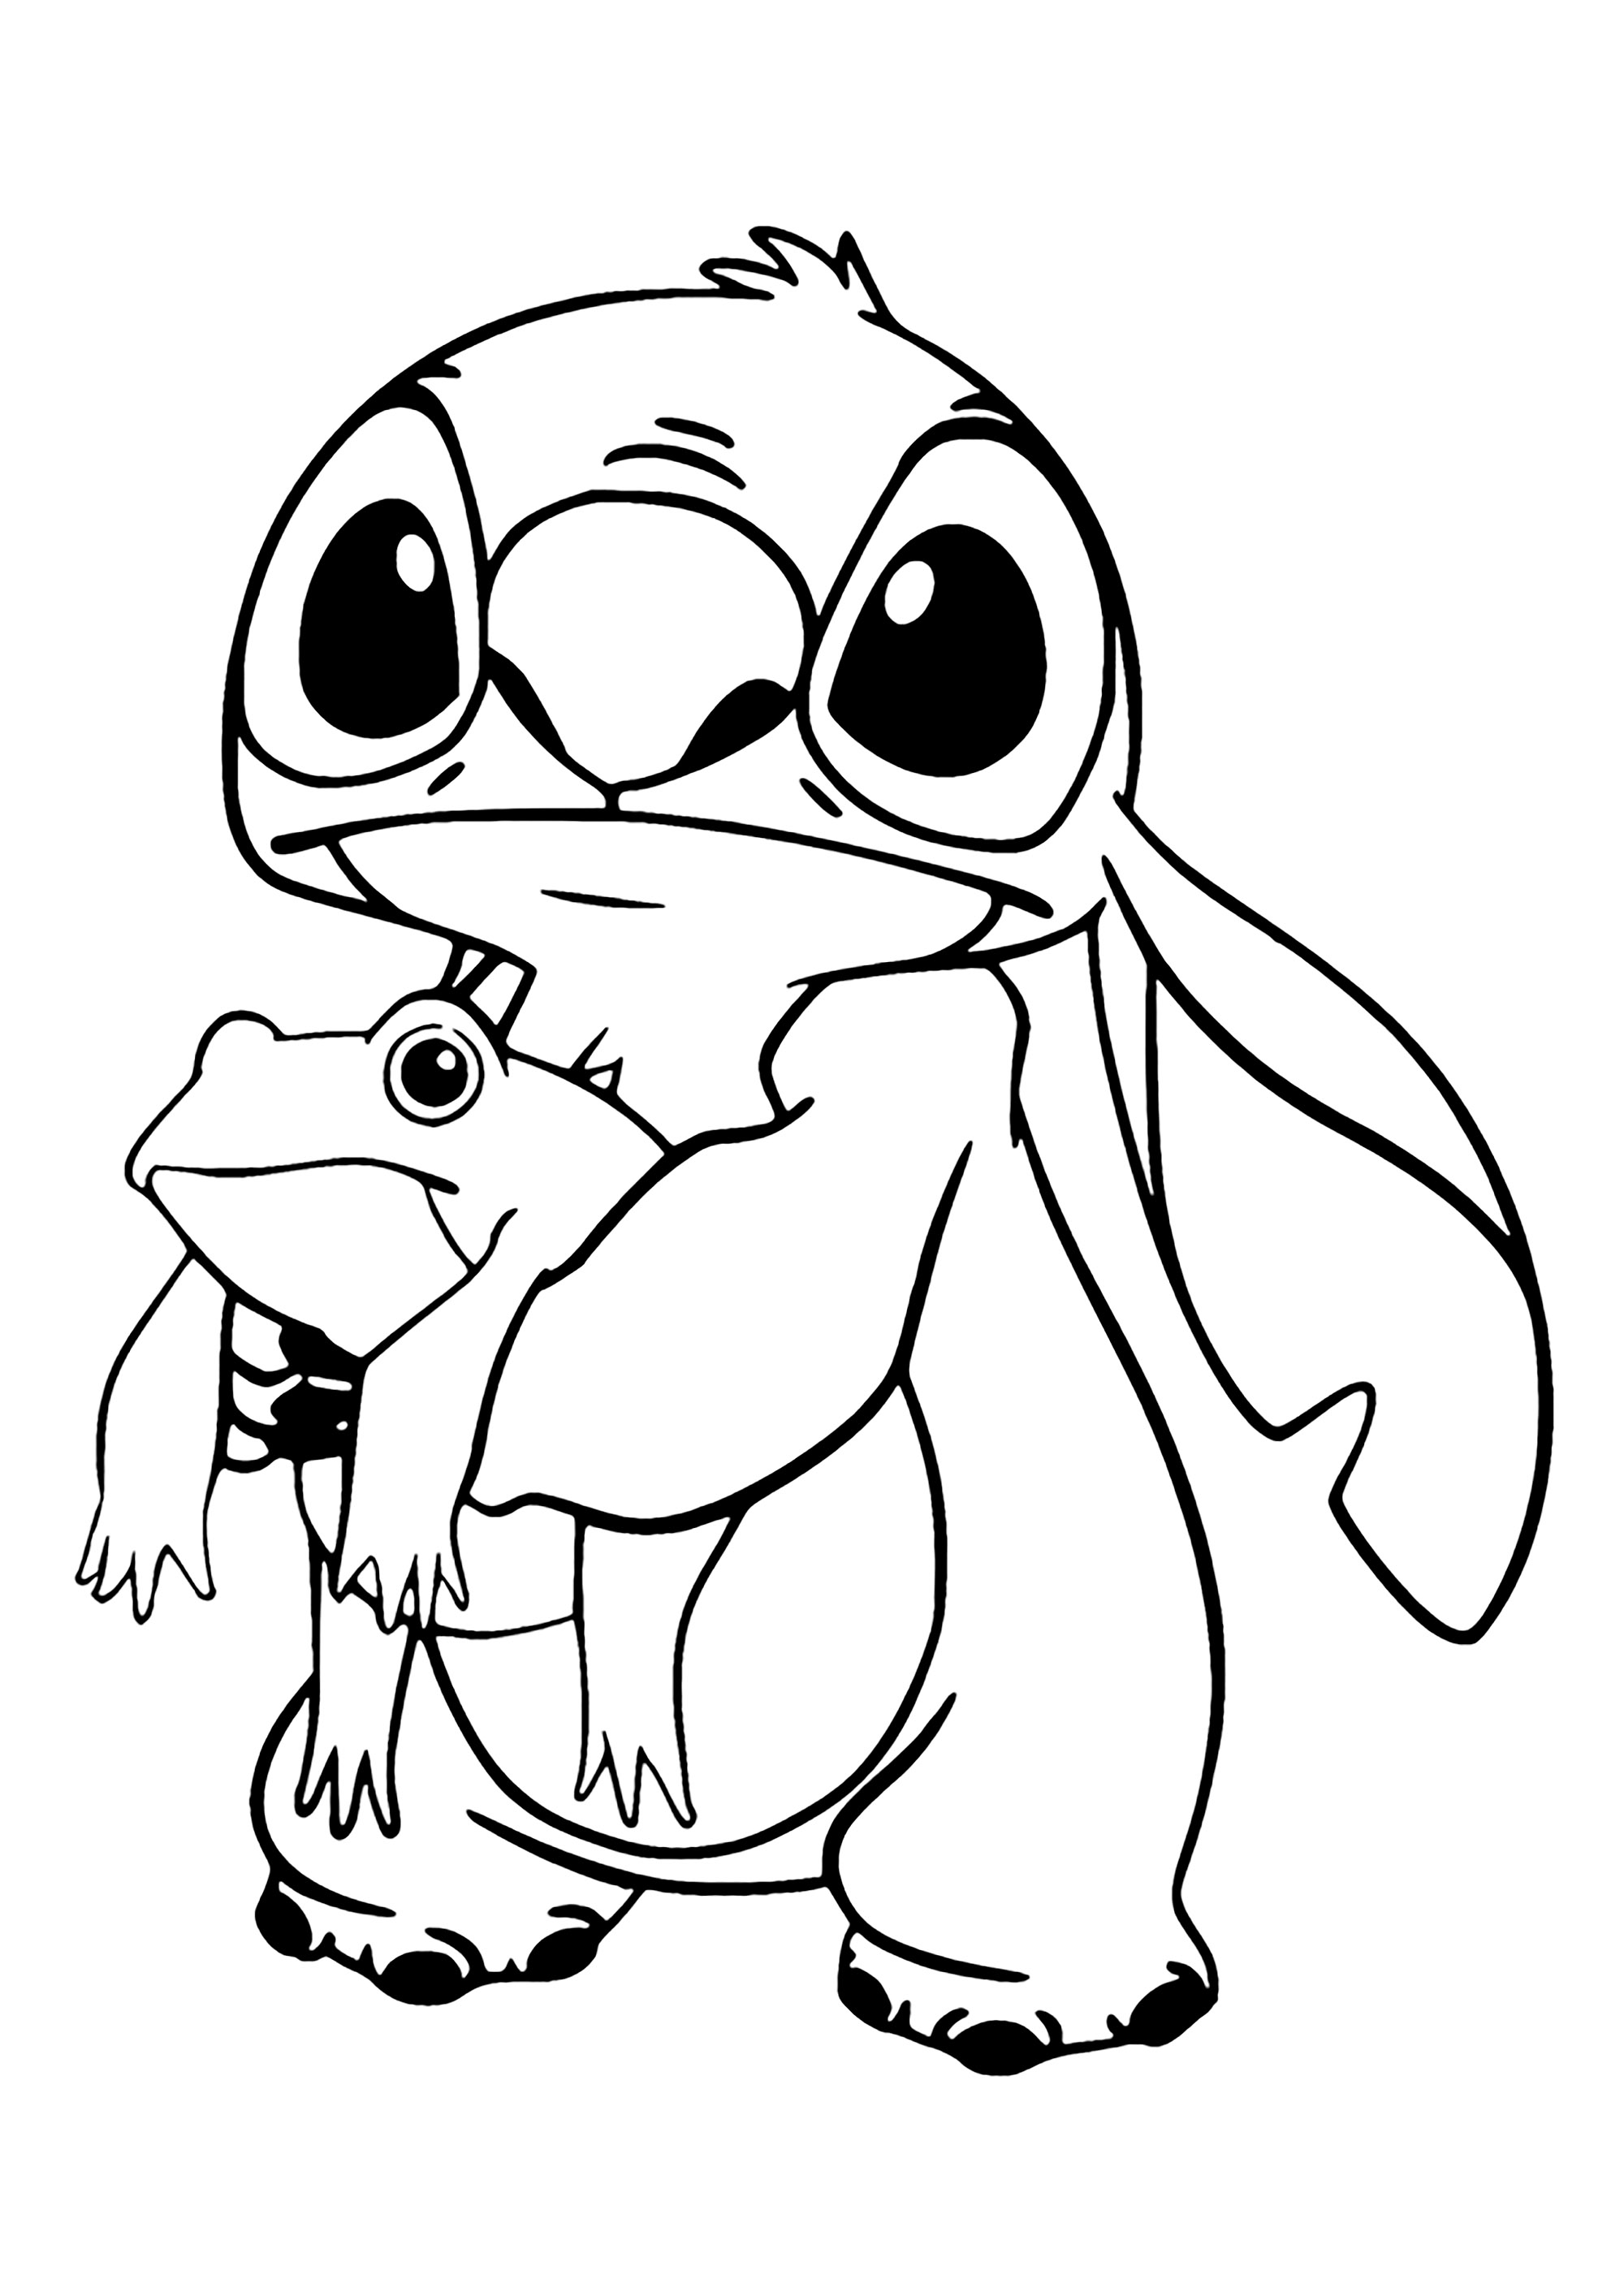 Stitch coloring pages. Free Printable Stitch coloring pages.  Stitch  coloring pages, Cartoon coloring pages, Disney coloring pages